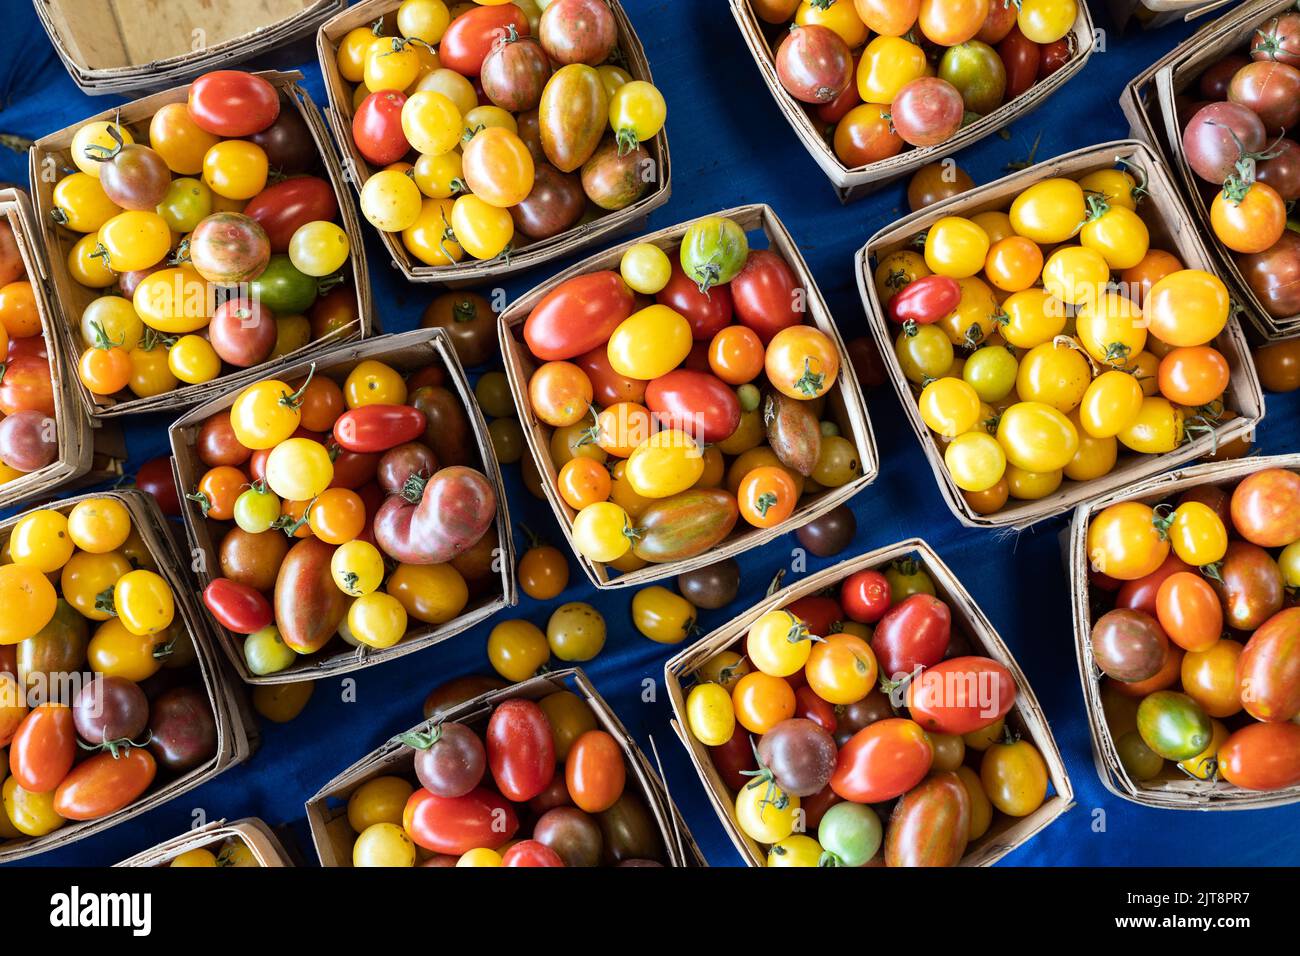 Multicolored tomatoes, pattern of yellow, red and orange cherry tomatoes Stock Photo